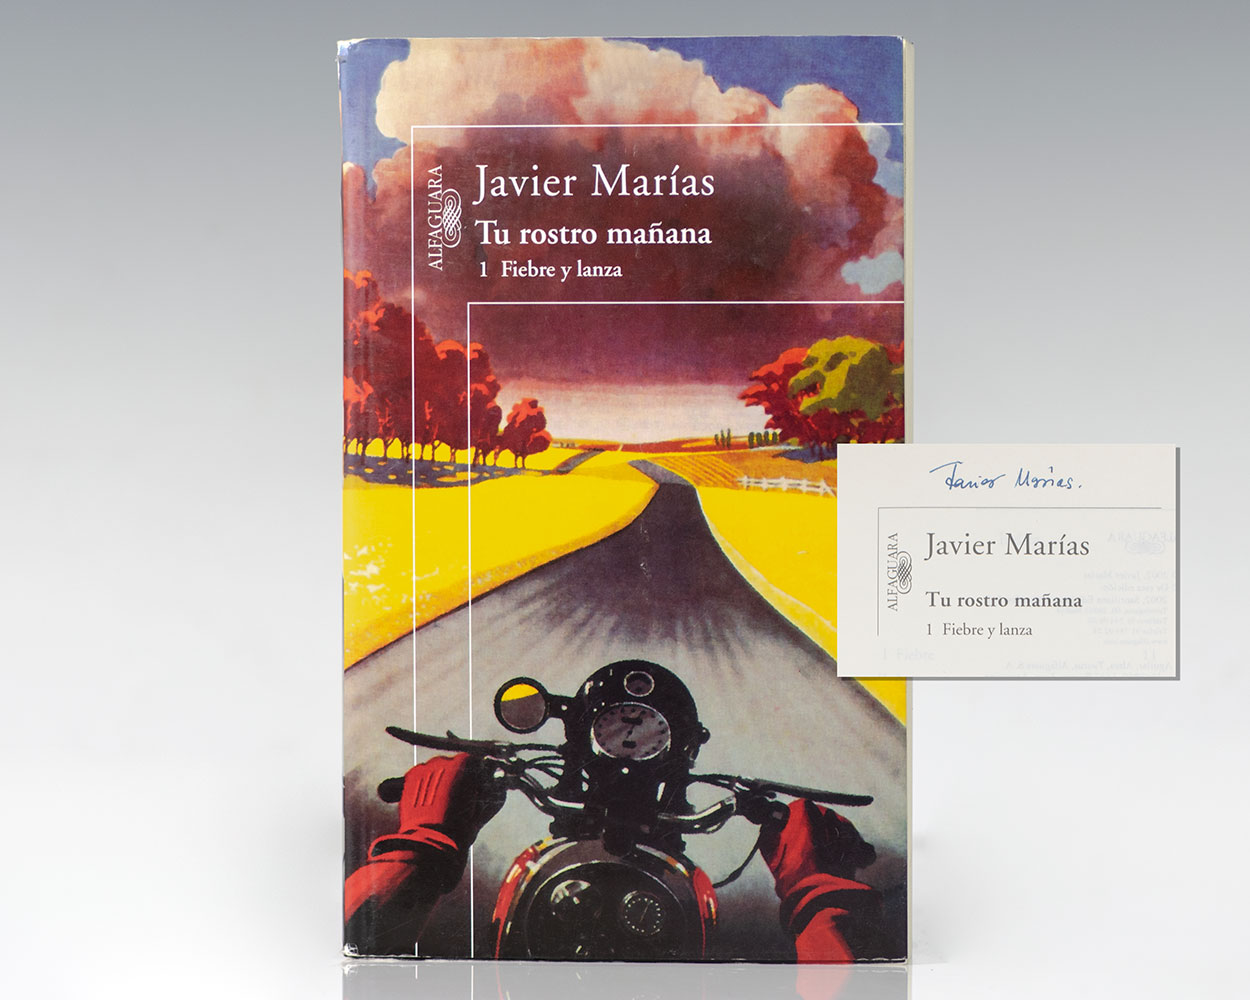 Fever and Spear (Your Face Tomorrow, #1) by Javier Marías